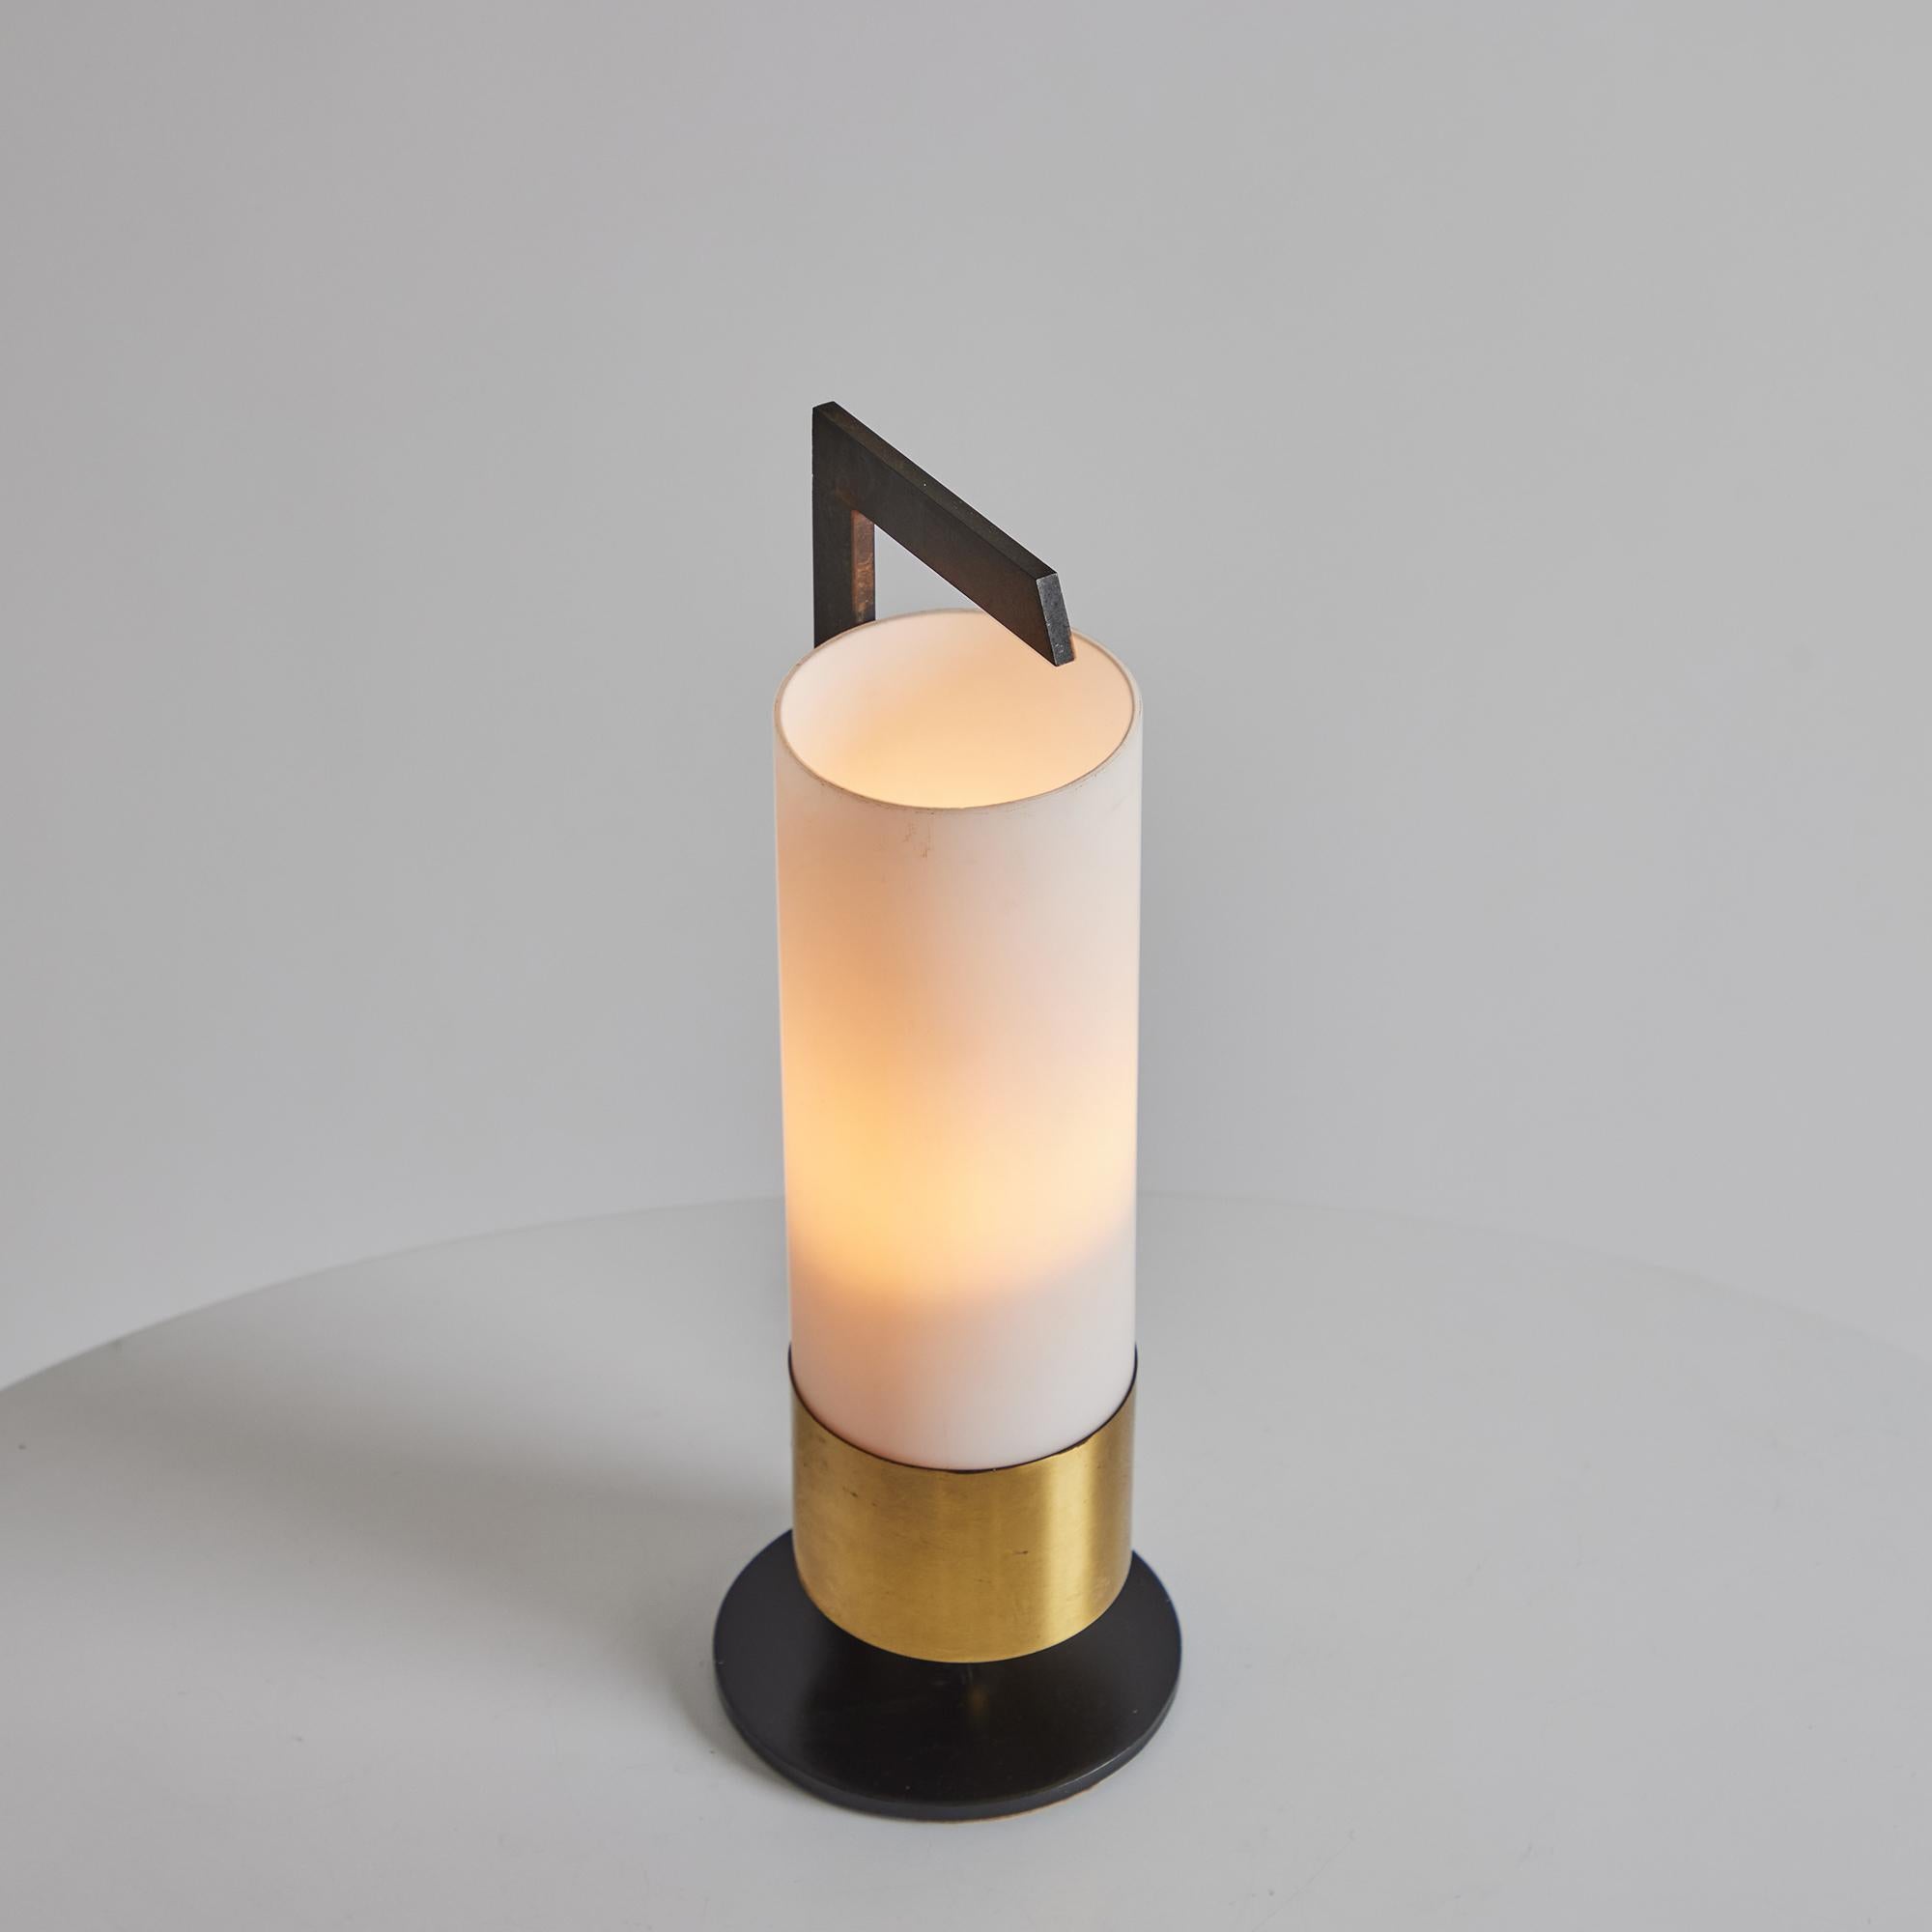 1950s Cylindrical Brass and Opaline Glass Table Lamp for Arlus.

Executed in opaline glass and patinated brass, this refined table lamp is attributed to French lighting manufacturer Arlus. Minimalist yet highly functional, its warm diffused light is